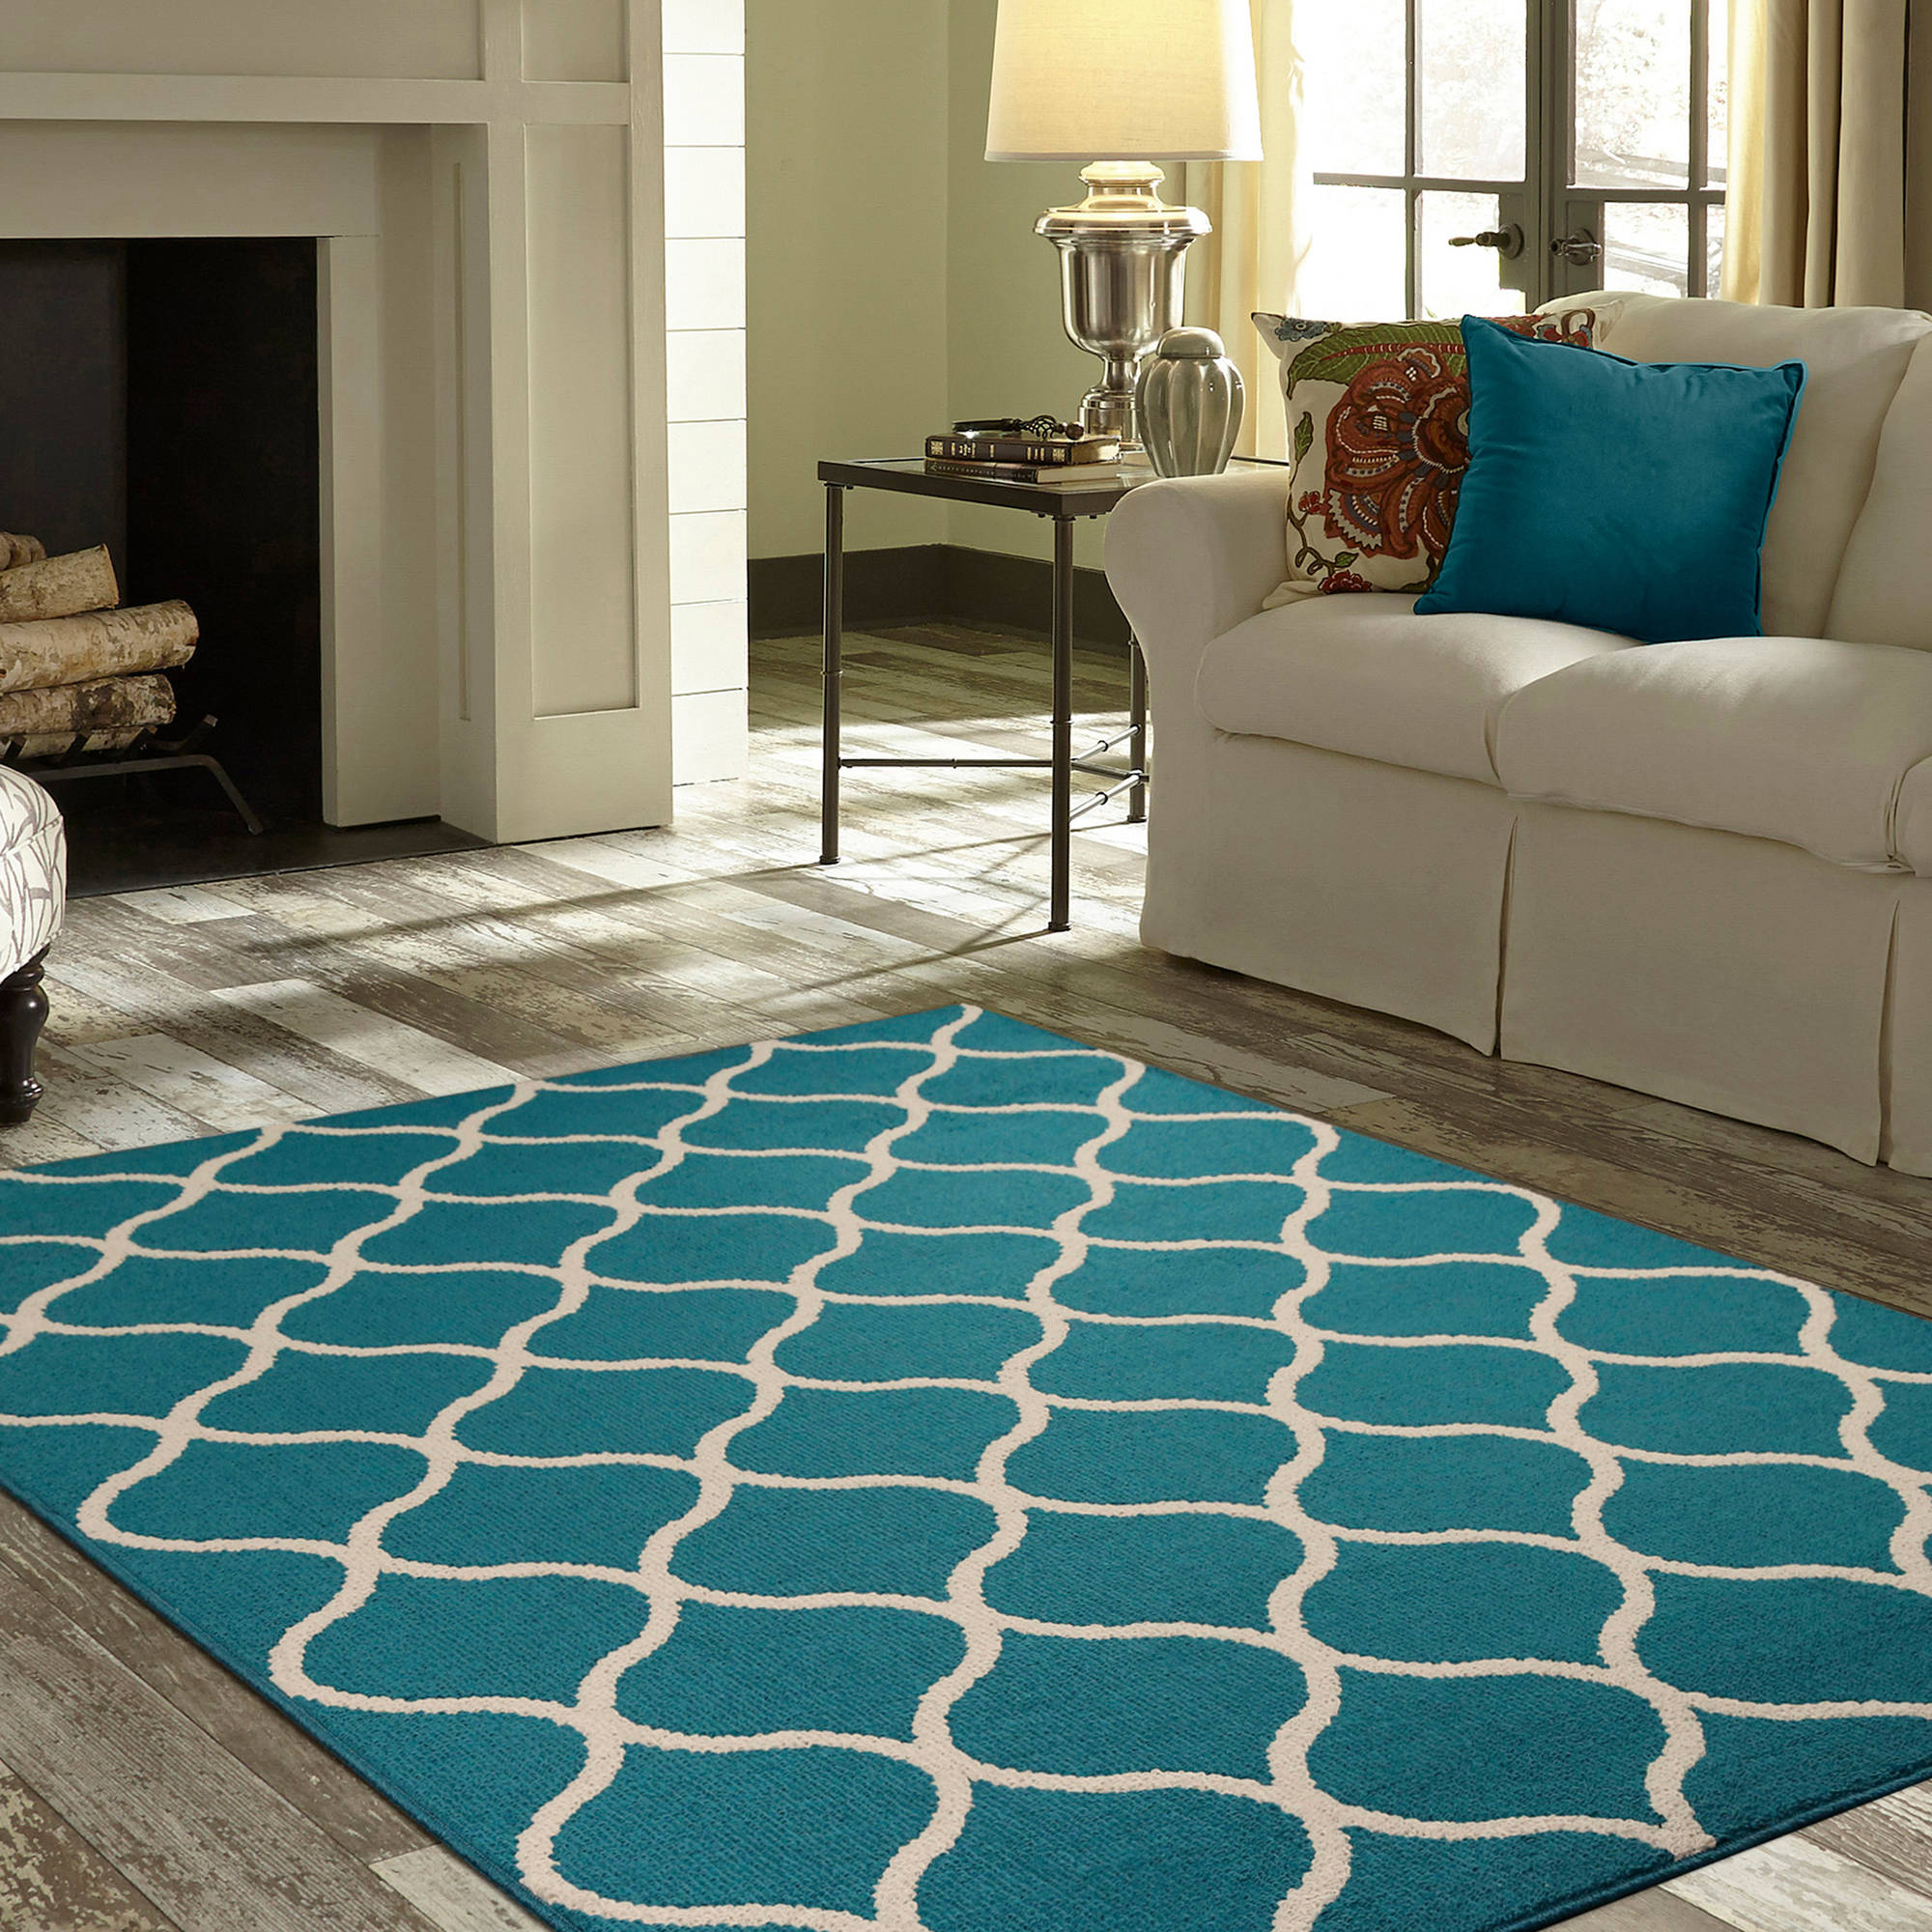 Tips for cleaning teal rug